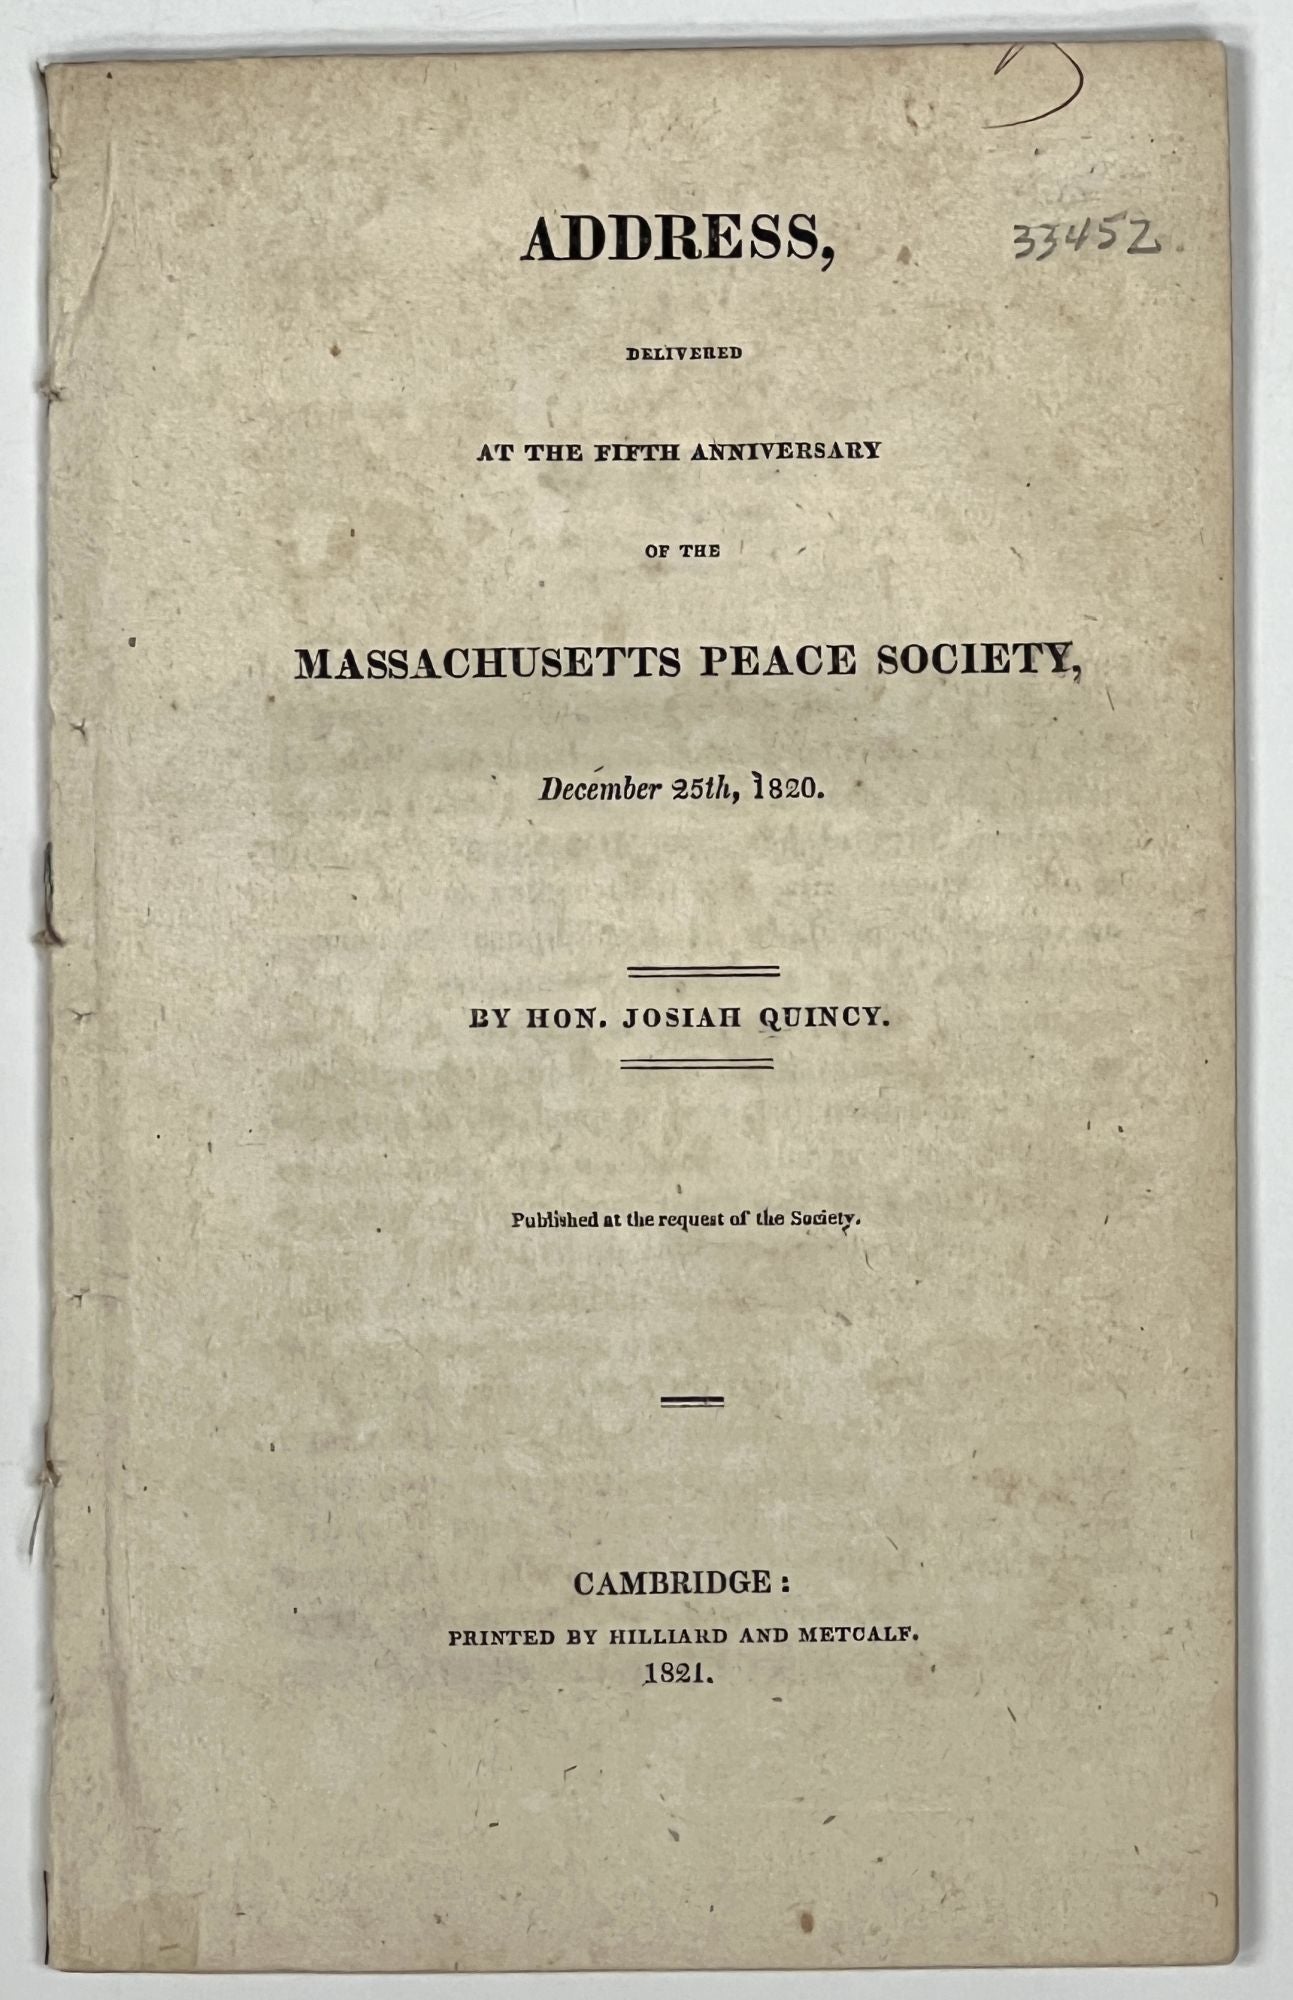 Quincy, Josiah [1772 - 1864] - ADDRESS, DELIVERED At The FIFTH ANNIVERSARY Of The MASSACHUSETTS PEACE SOCIETY, December 25th, 1820